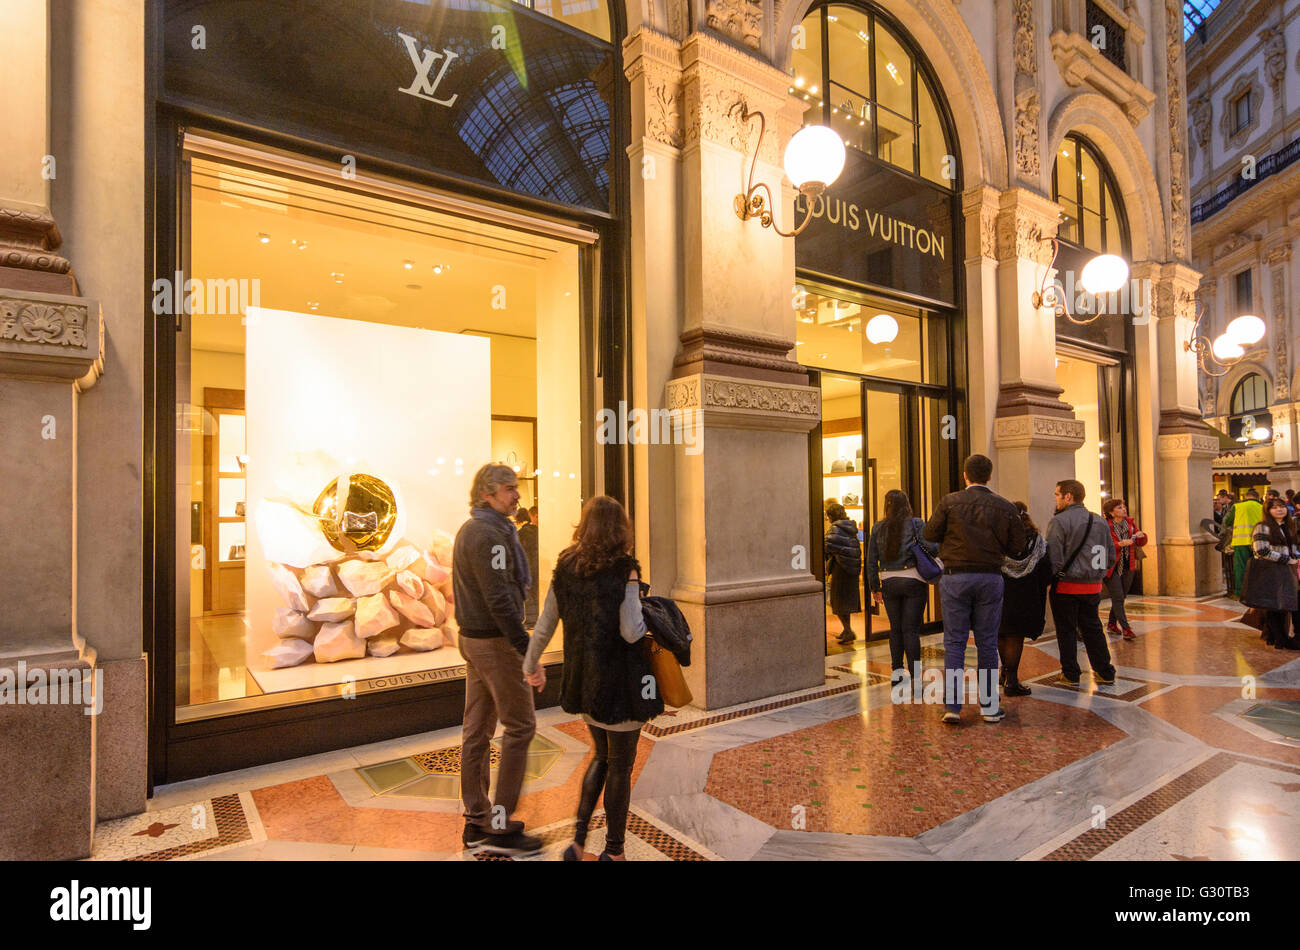 Louis Vuitton Store In Milan City Centre Stock Photo - Download